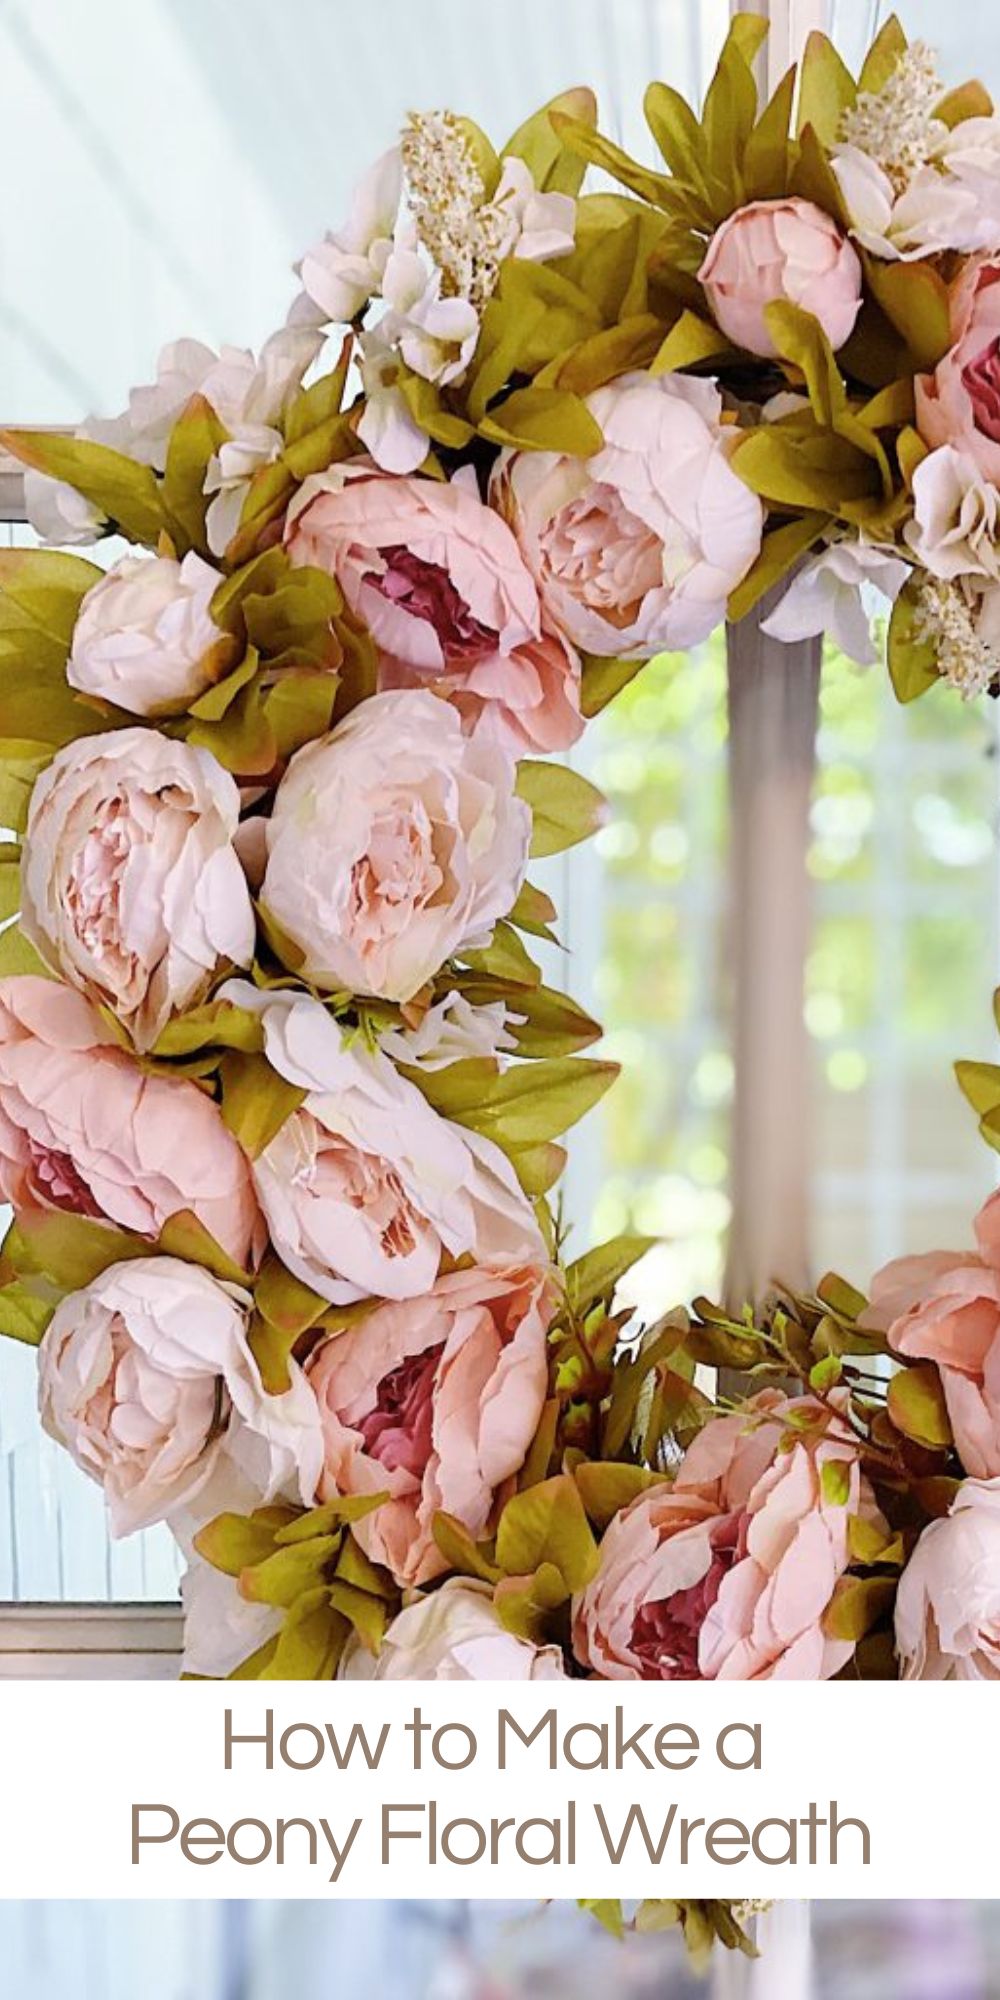 Spring is here in full bloom and today I am sharing an easy DIY How to Make a Peony Floral Wreath. Isn't it awesome?